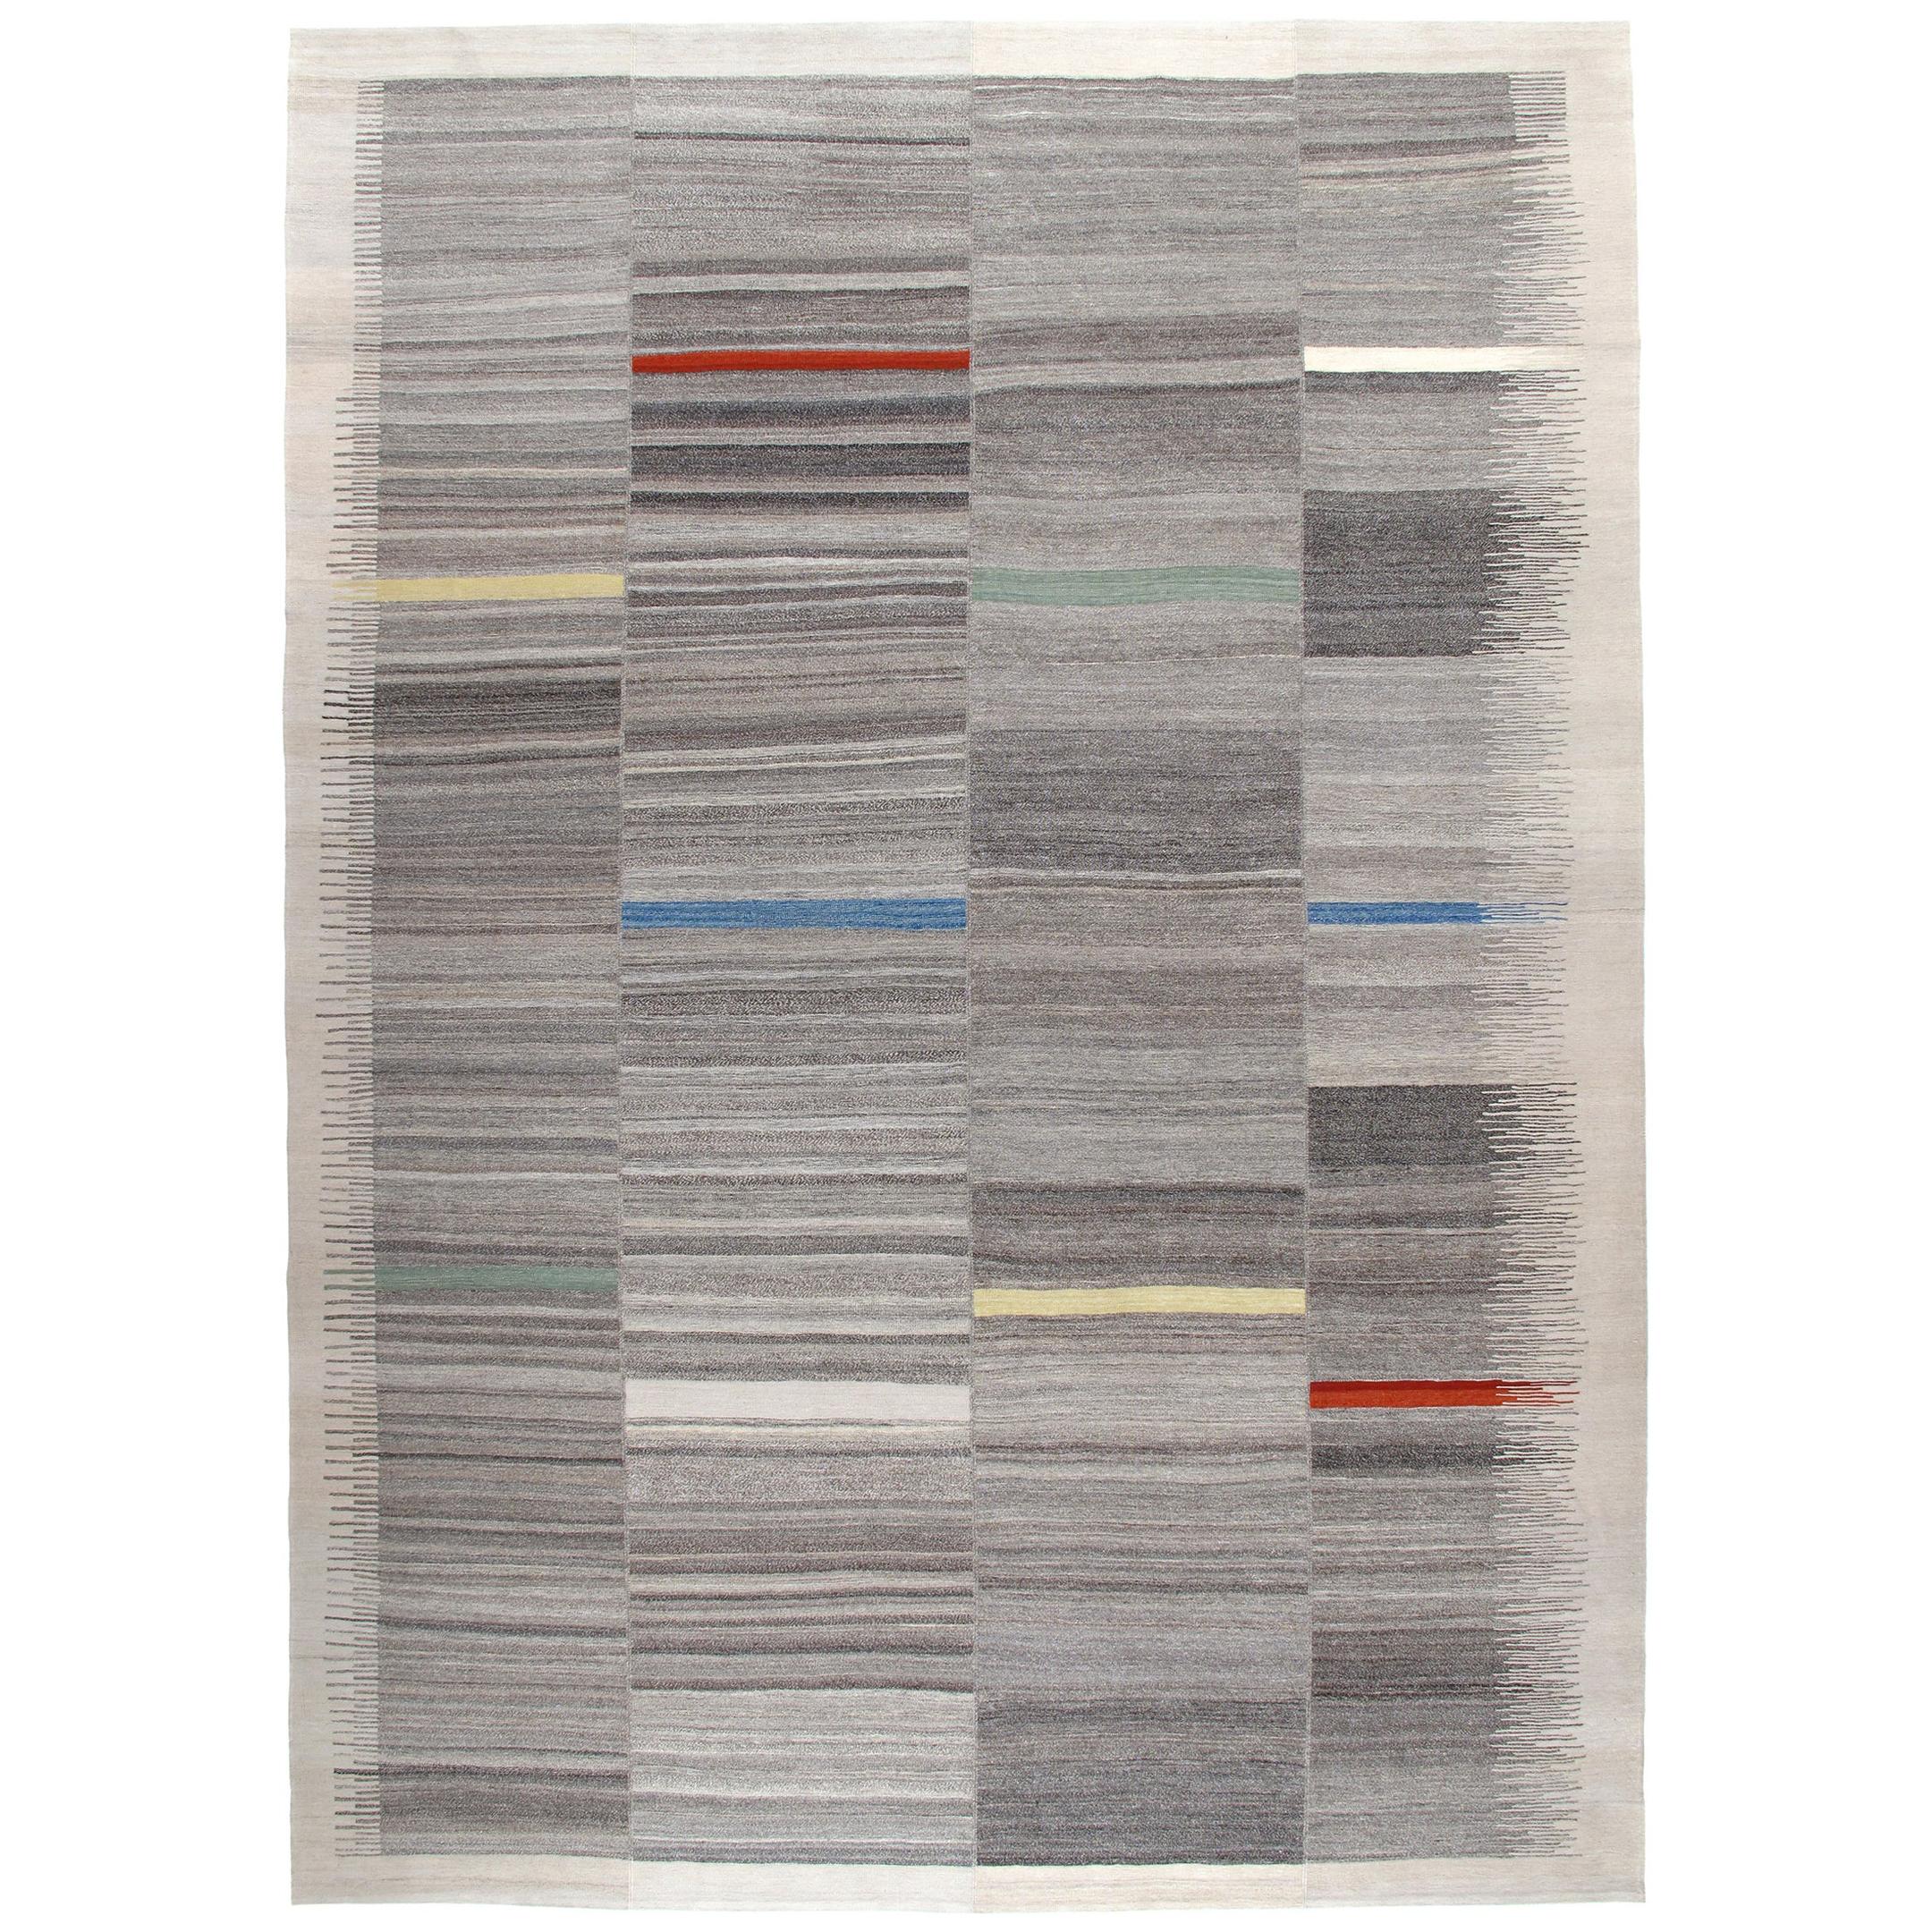 Modern Mazandaran Style Handwoven Flat-Weave Rug in Natural with Multi-Colors